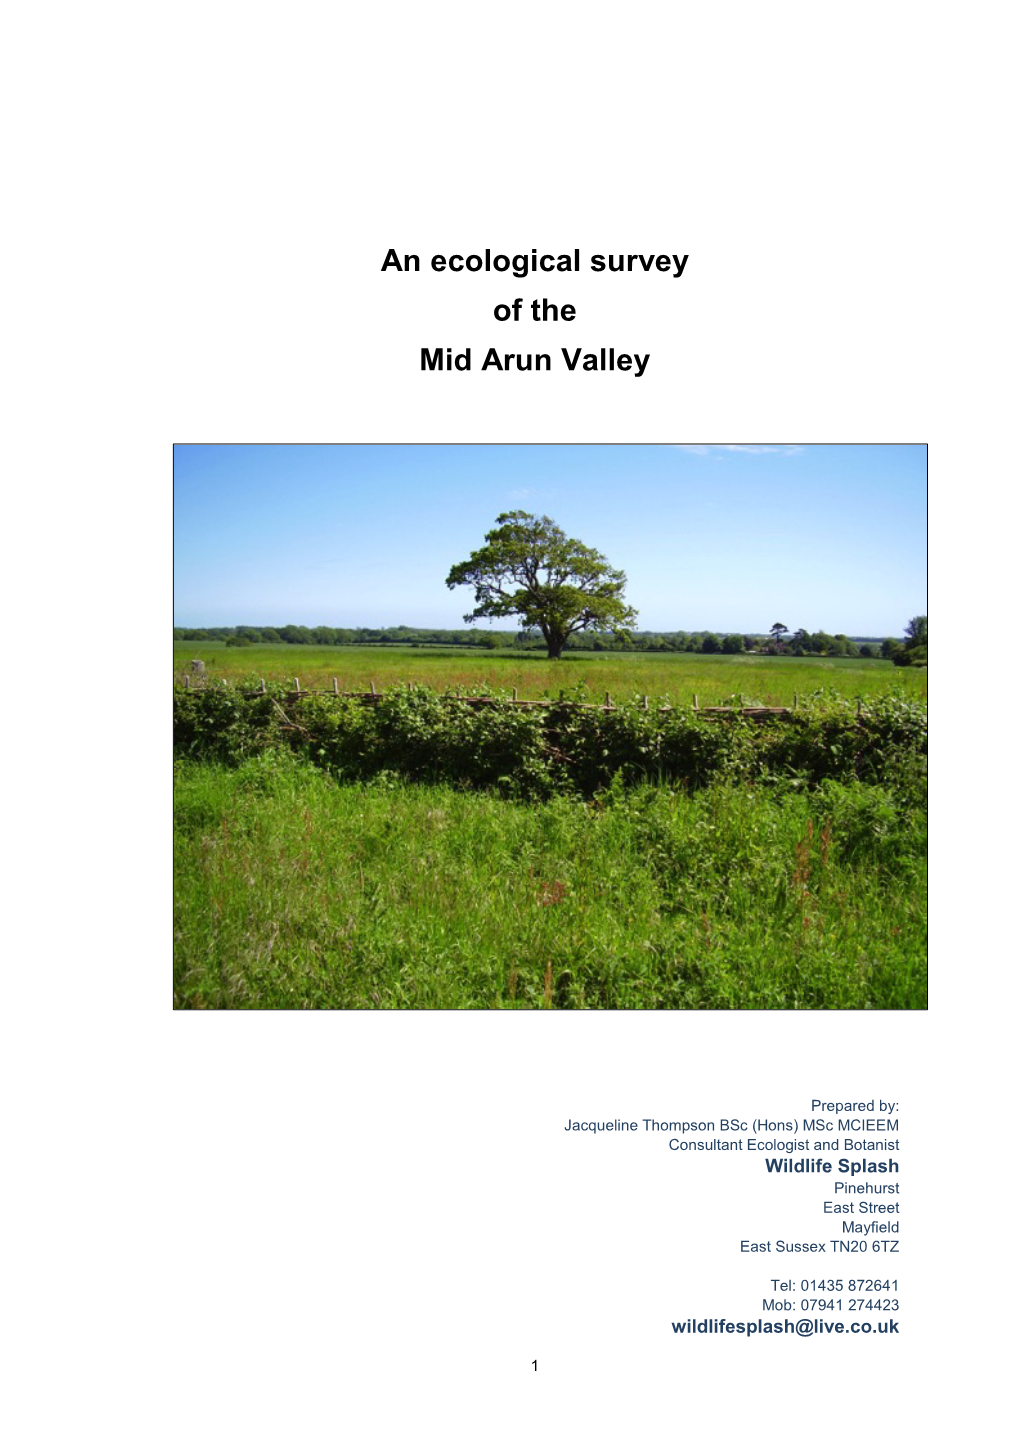 An Ecological Survey of the Mid Arun Valley